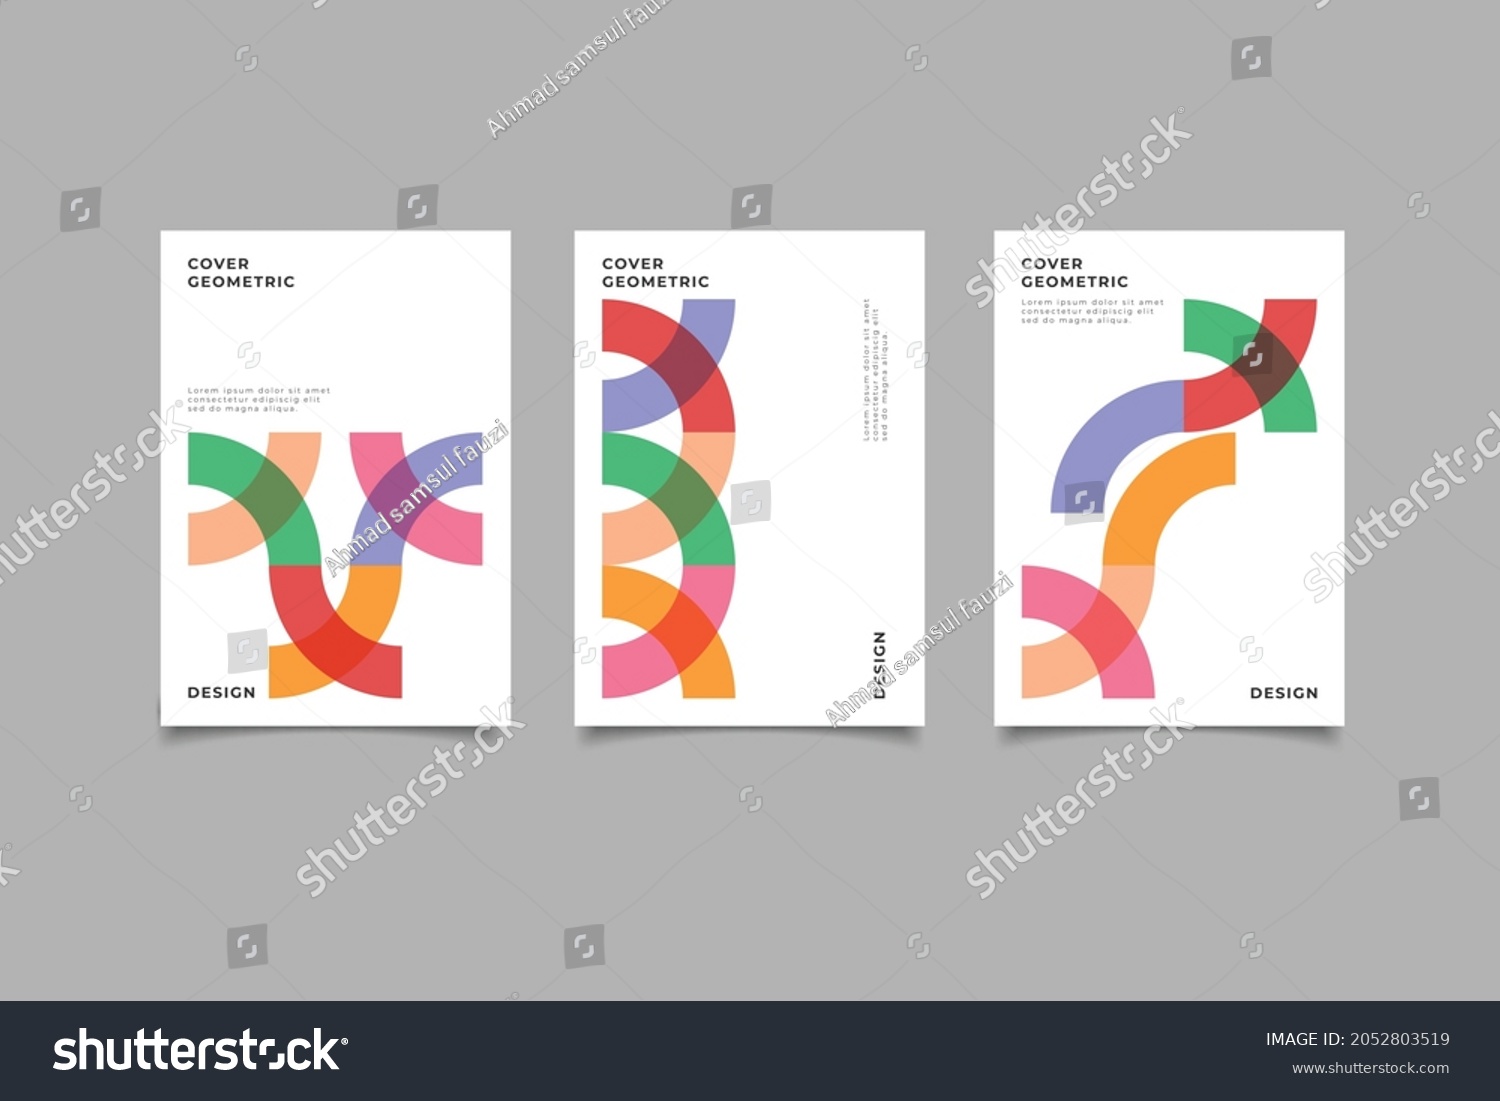 SVG of A collection of cover background templates for presentations, corporate cover documents, corporate, with a modern minimalist style that is very elegant,geometric memphis design.vector illustration svg